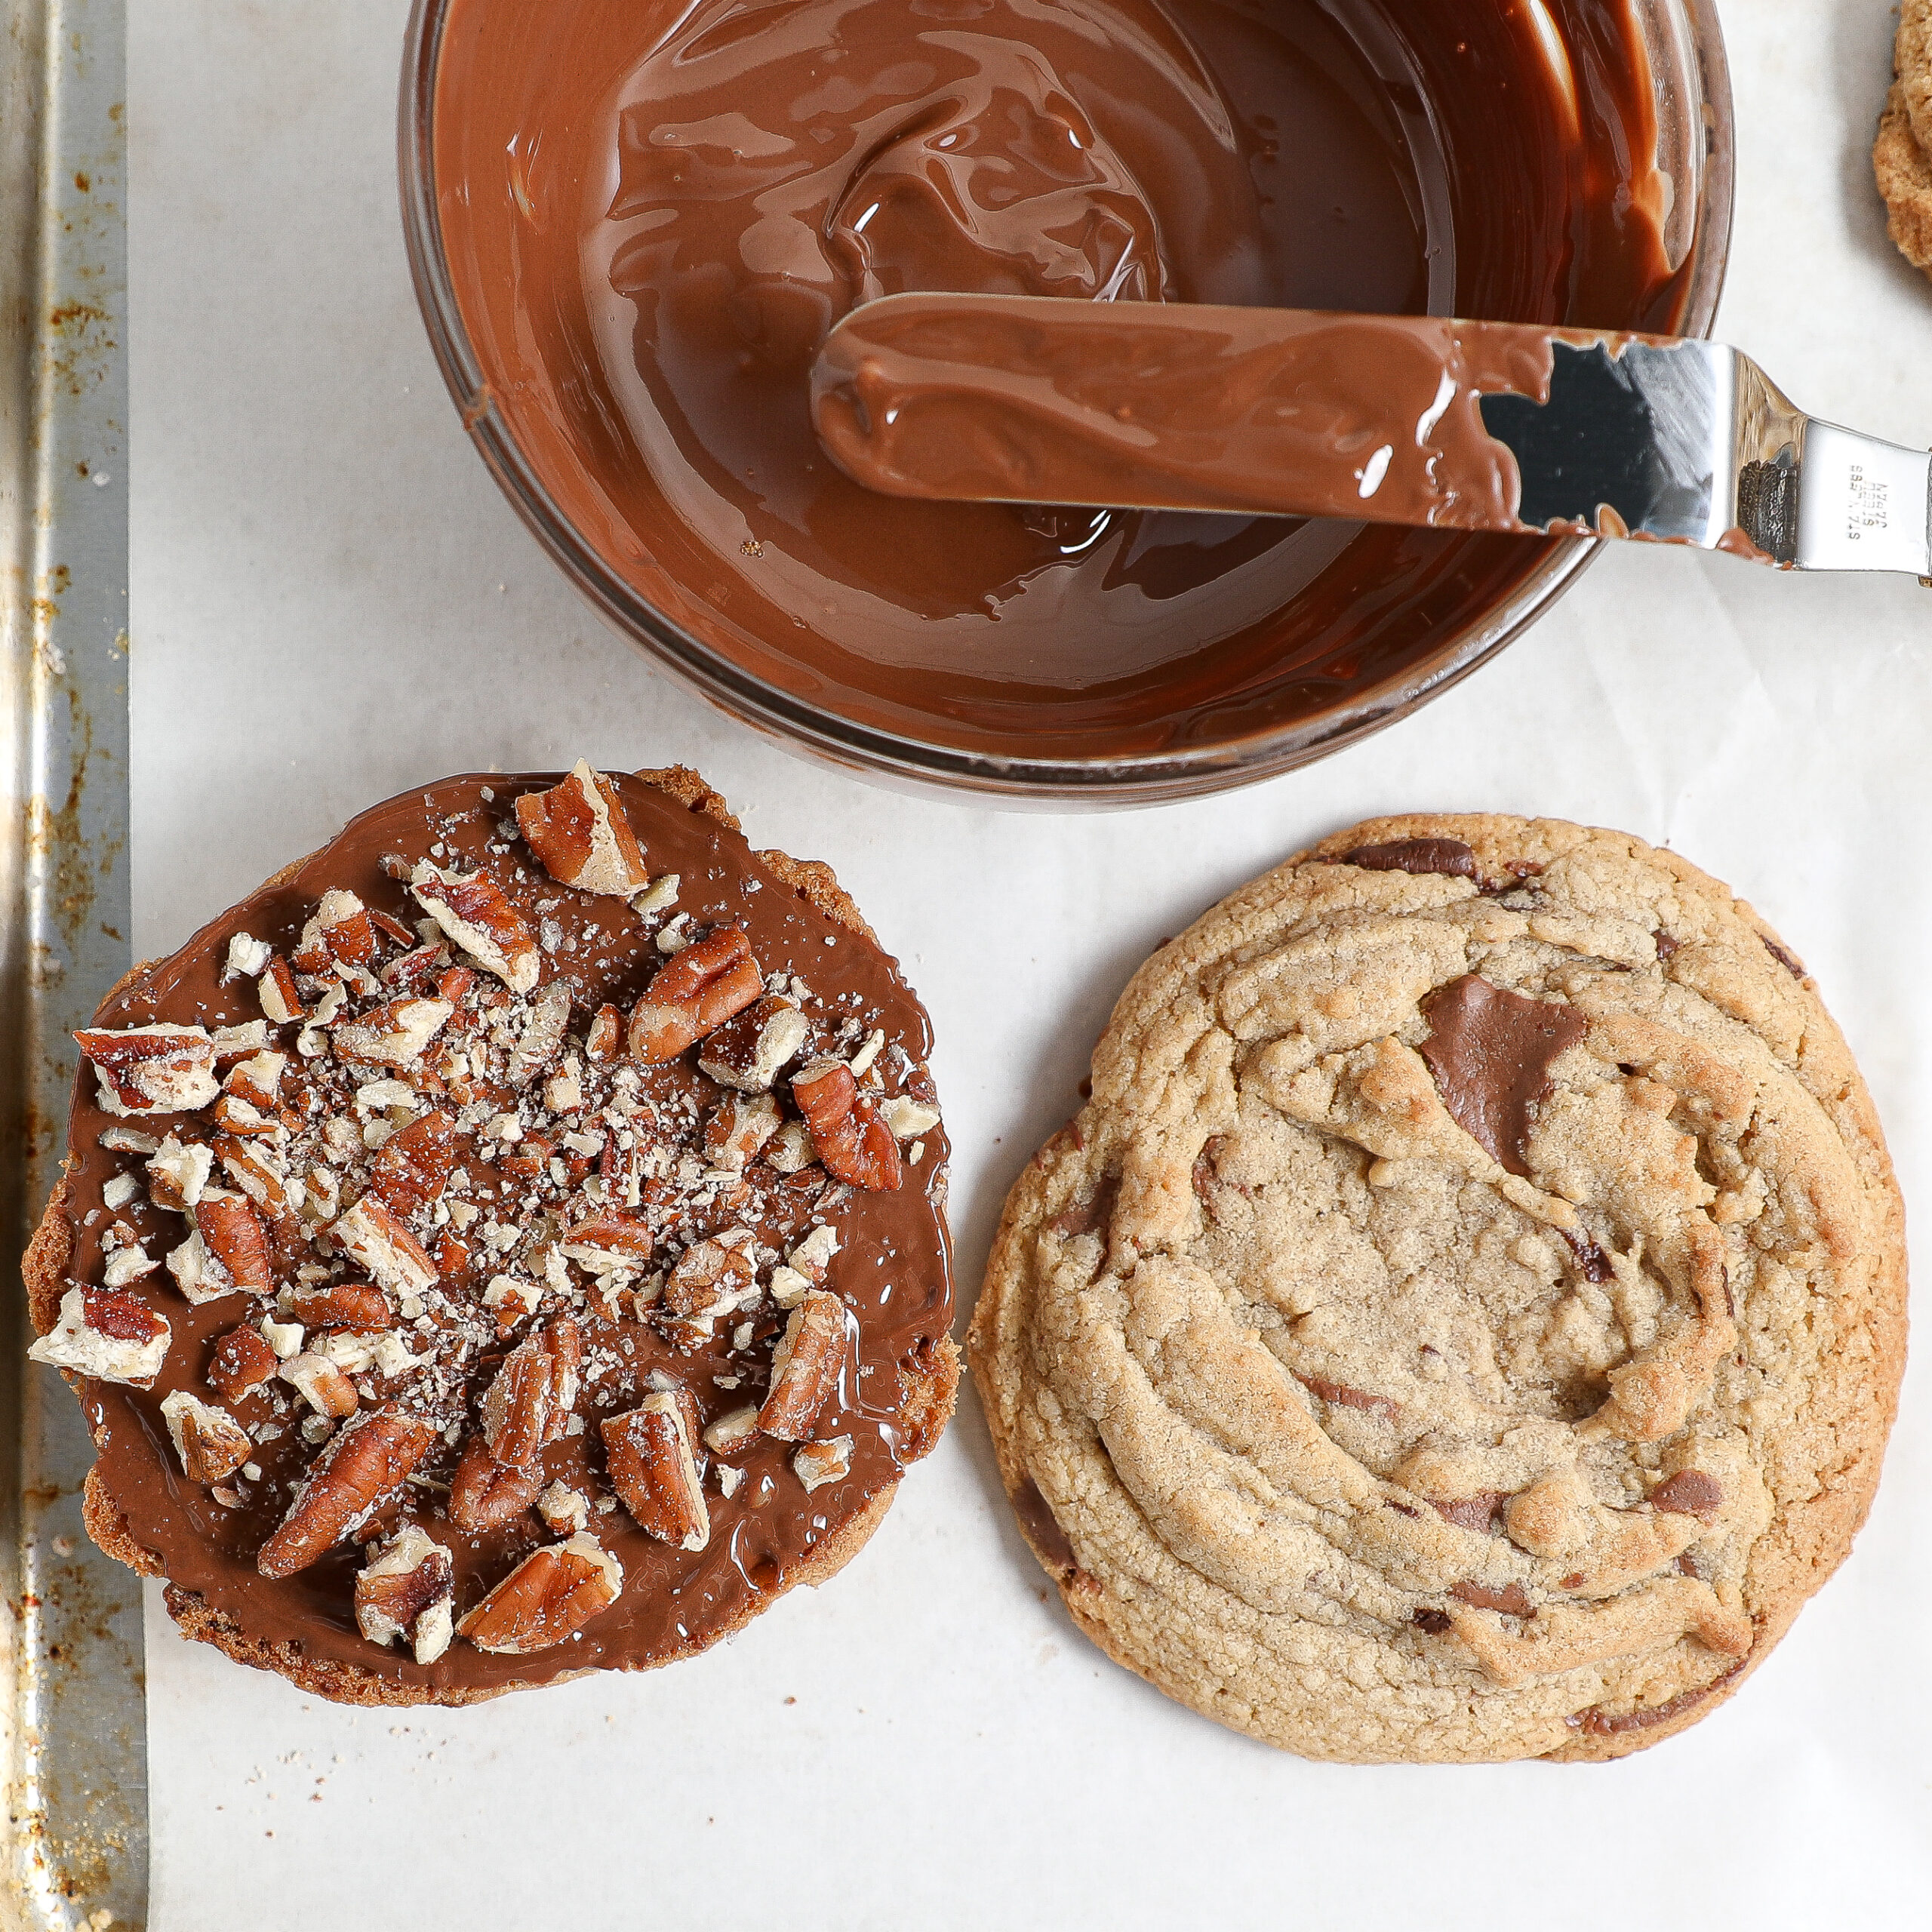 Browned Butter Chocolate Chip Cookies and Chocolate and Pecan Dip